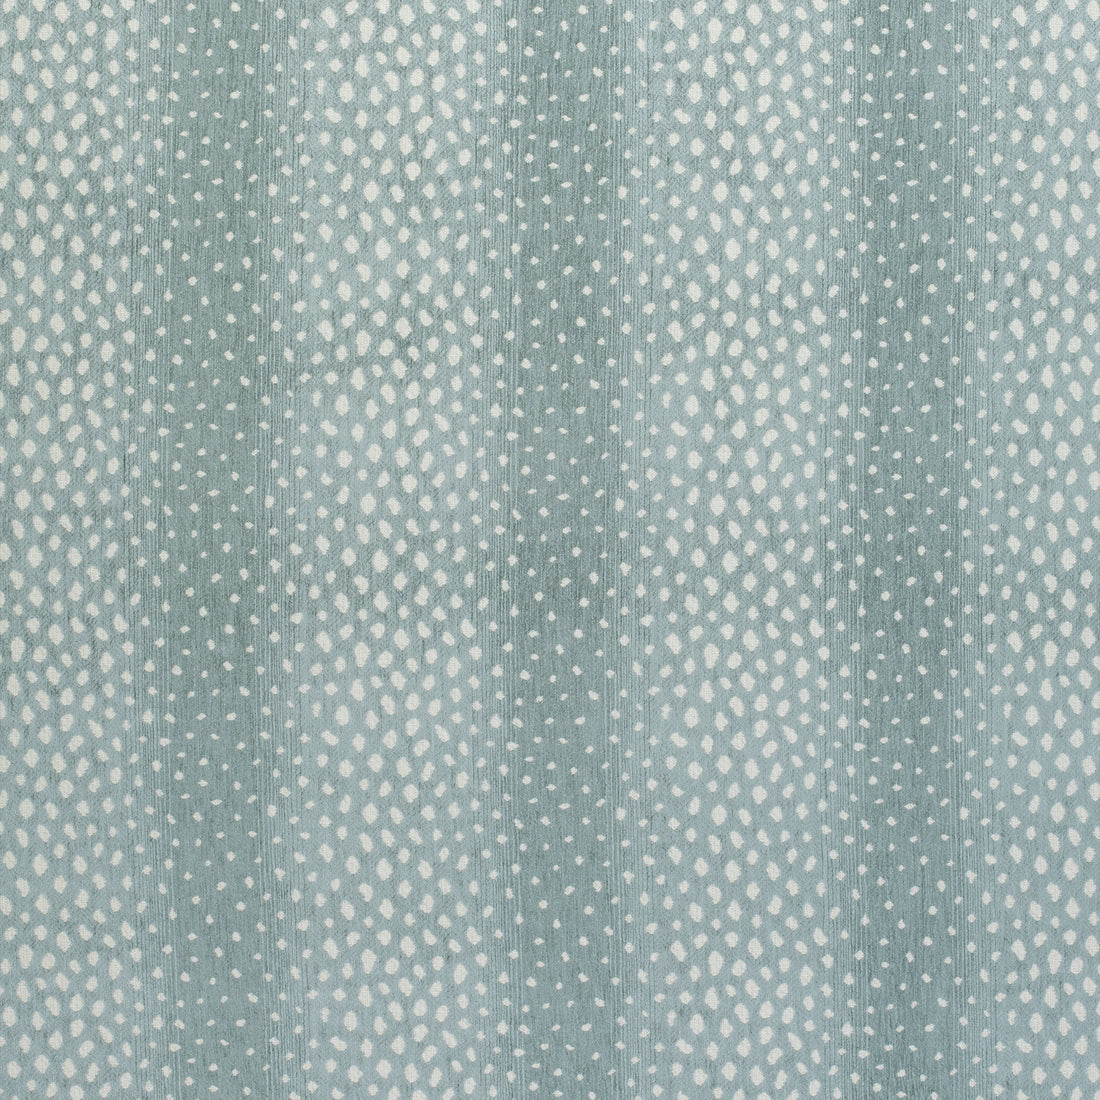 Gazelle fabric in aqua color - pattern number W80429 - by Thibaut in the Woven Resource Vol 10 Menagerie collection